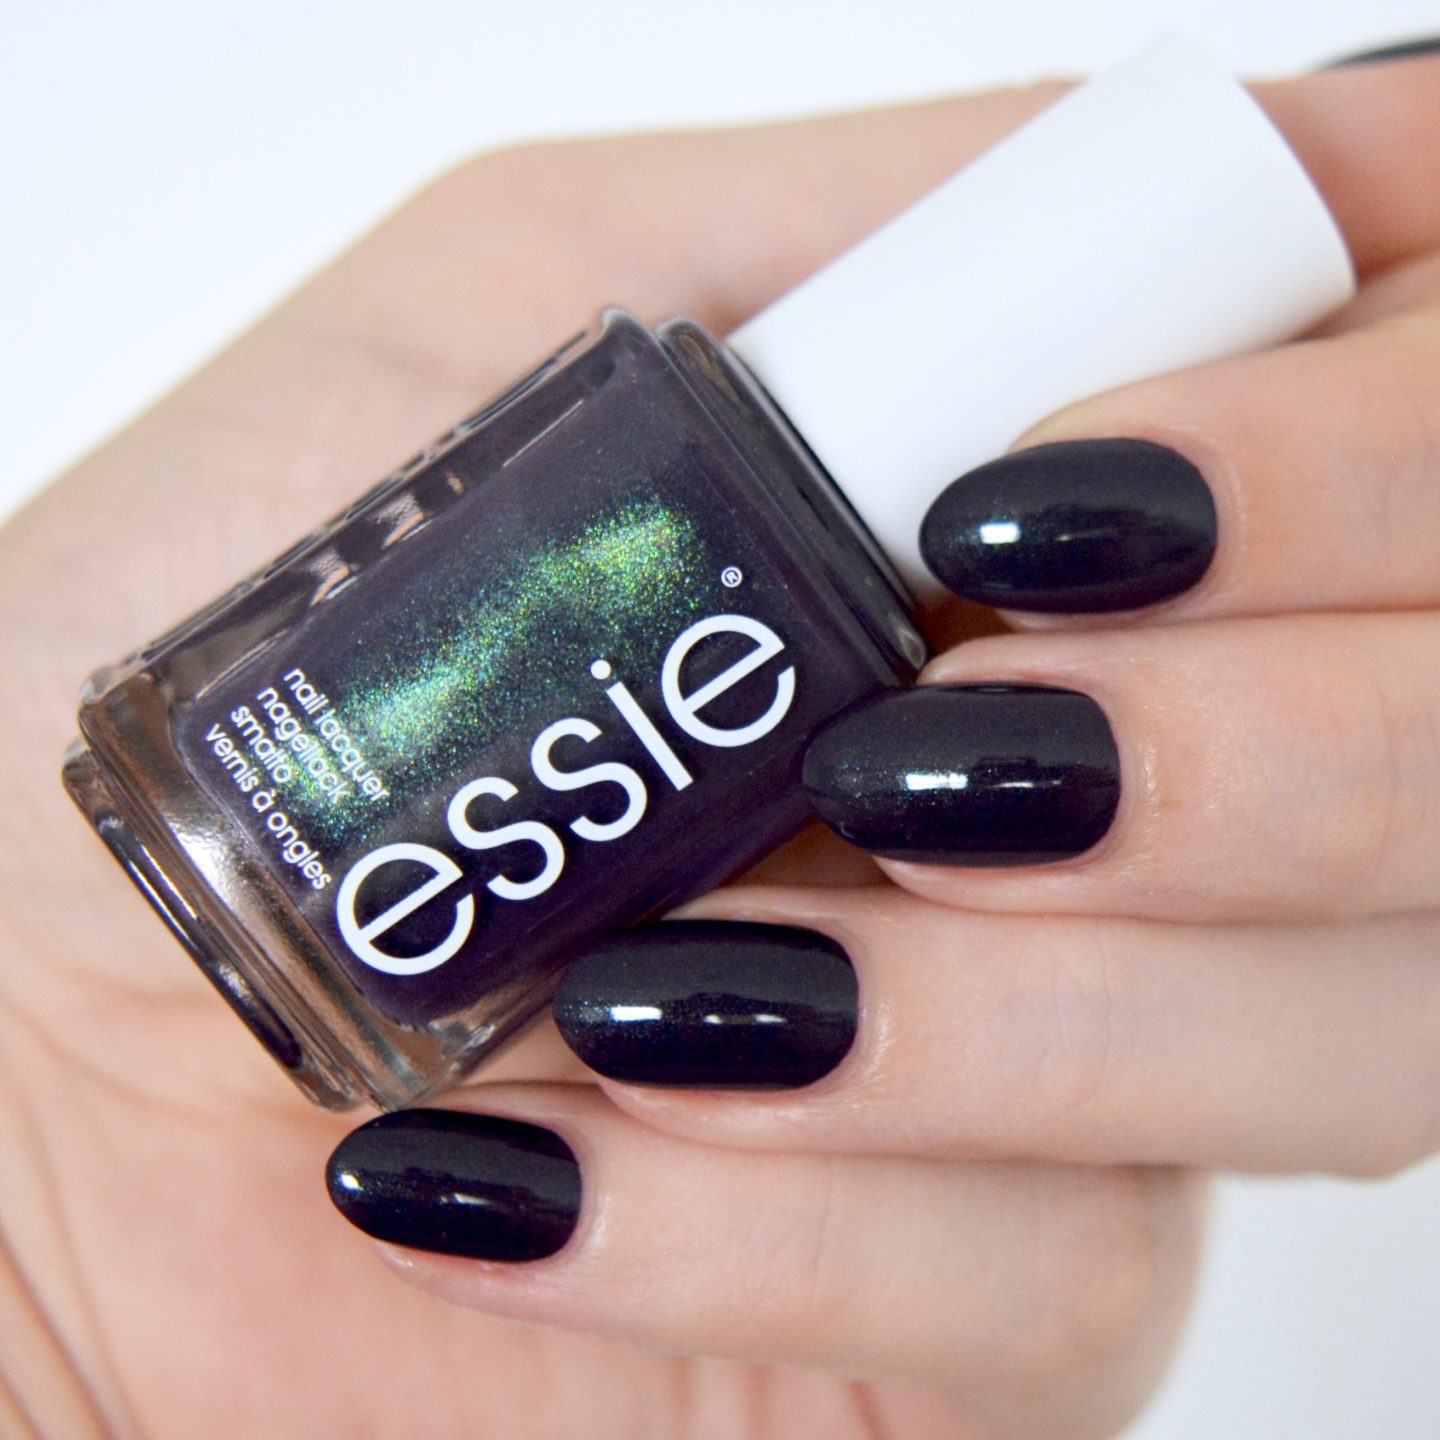 Essie Fall 2017 collection - Dress To The Nineties